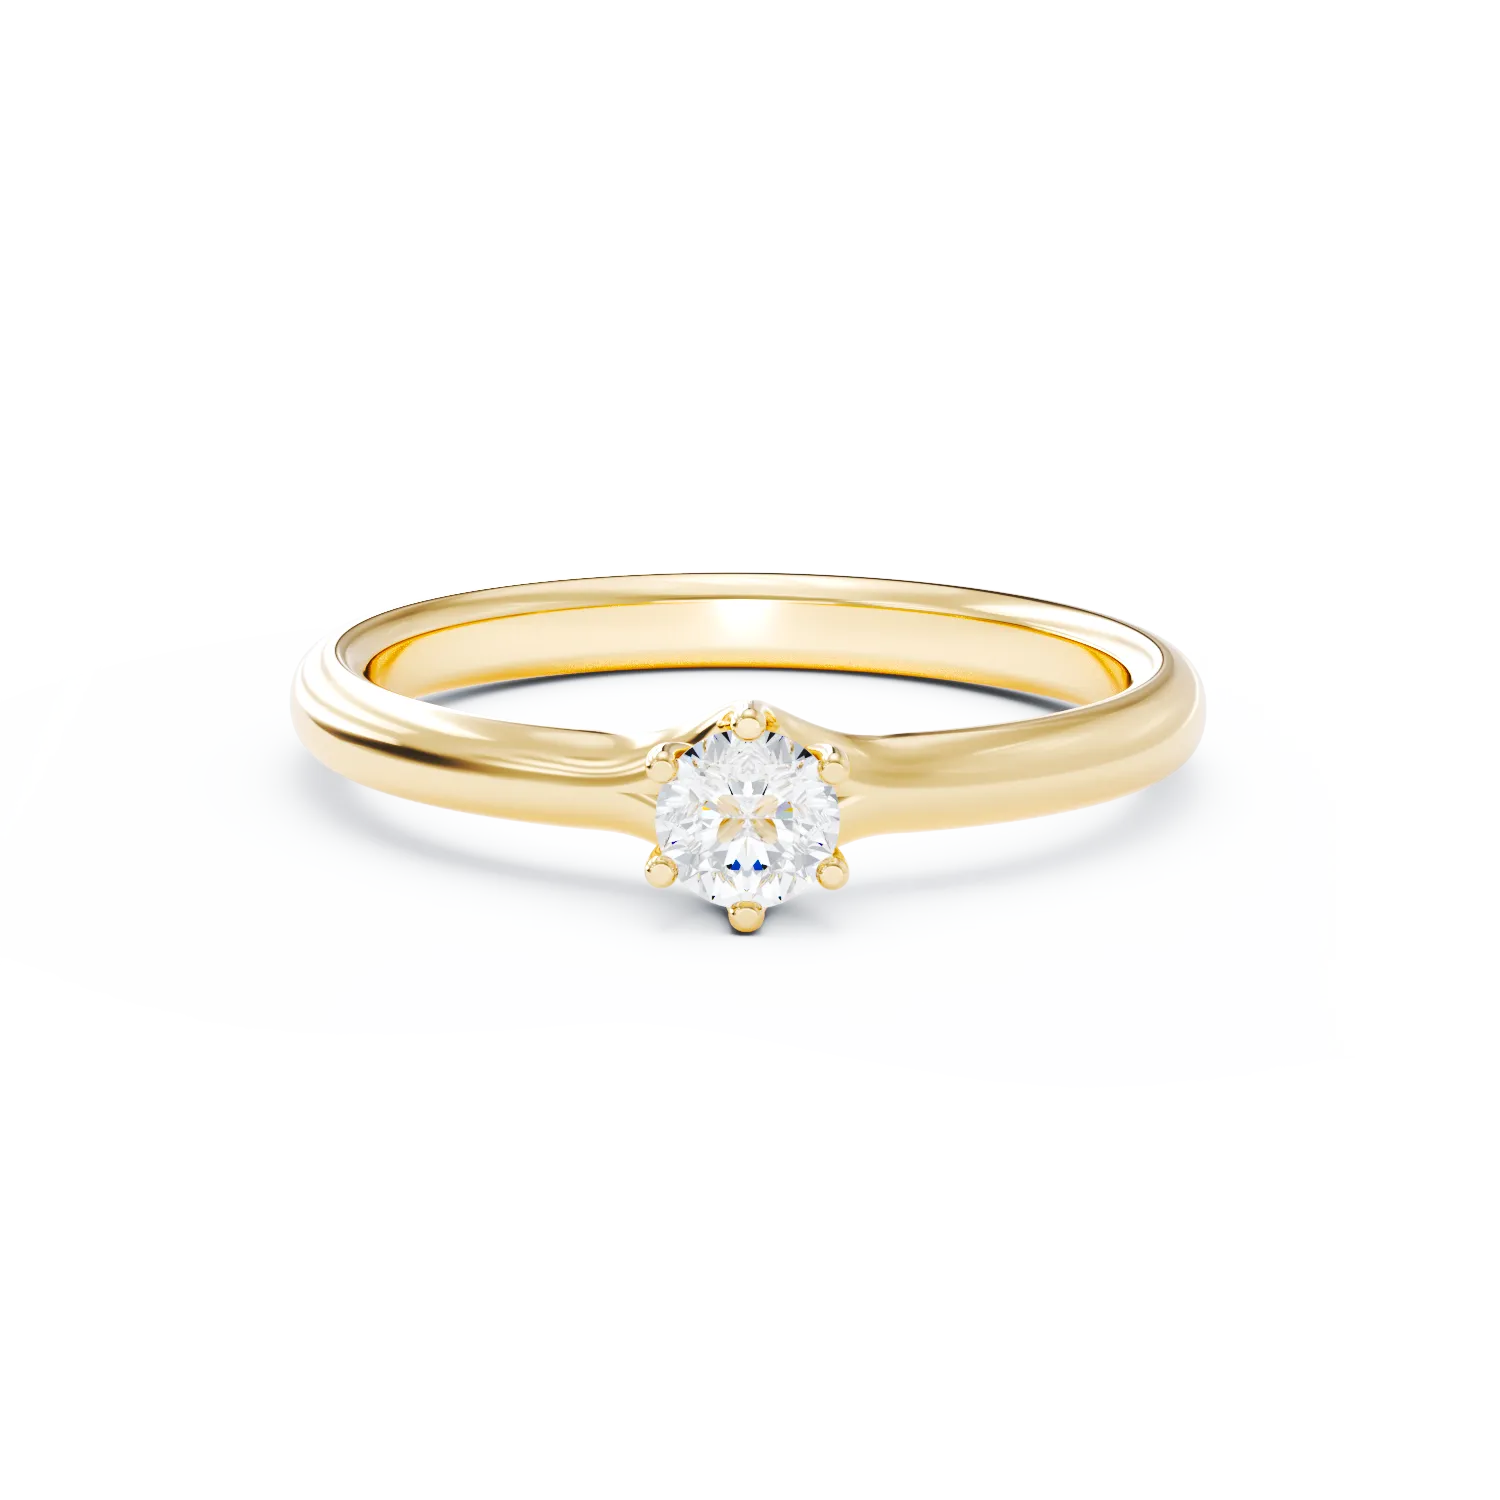 18K yellow gold engagement ring with a 0.14ct solitaire diamond